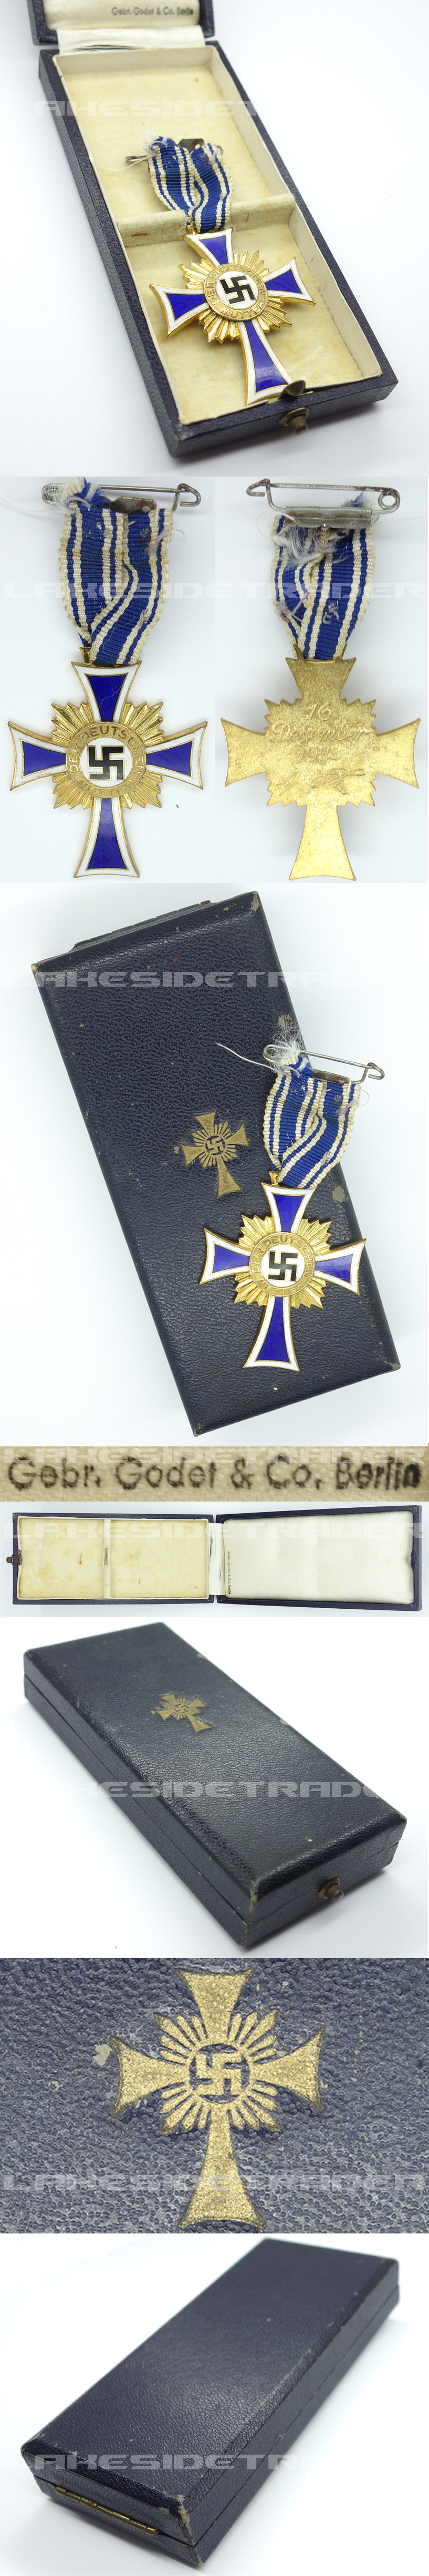 Cased Mothers Cross in Gold by Godet